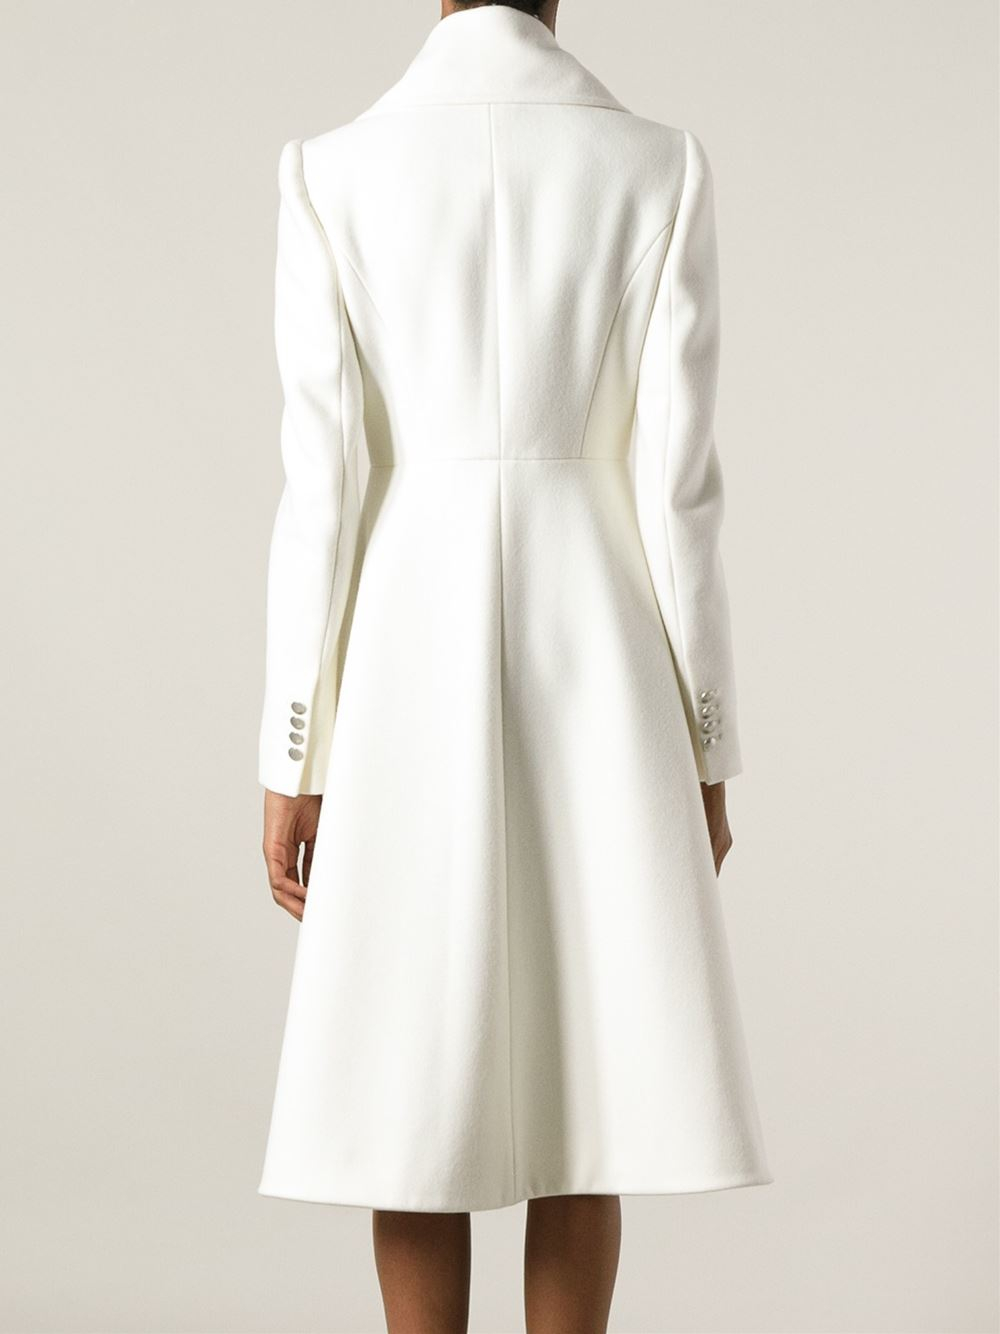 Alexander McQueen Double Breasted Coat in White - Lyst